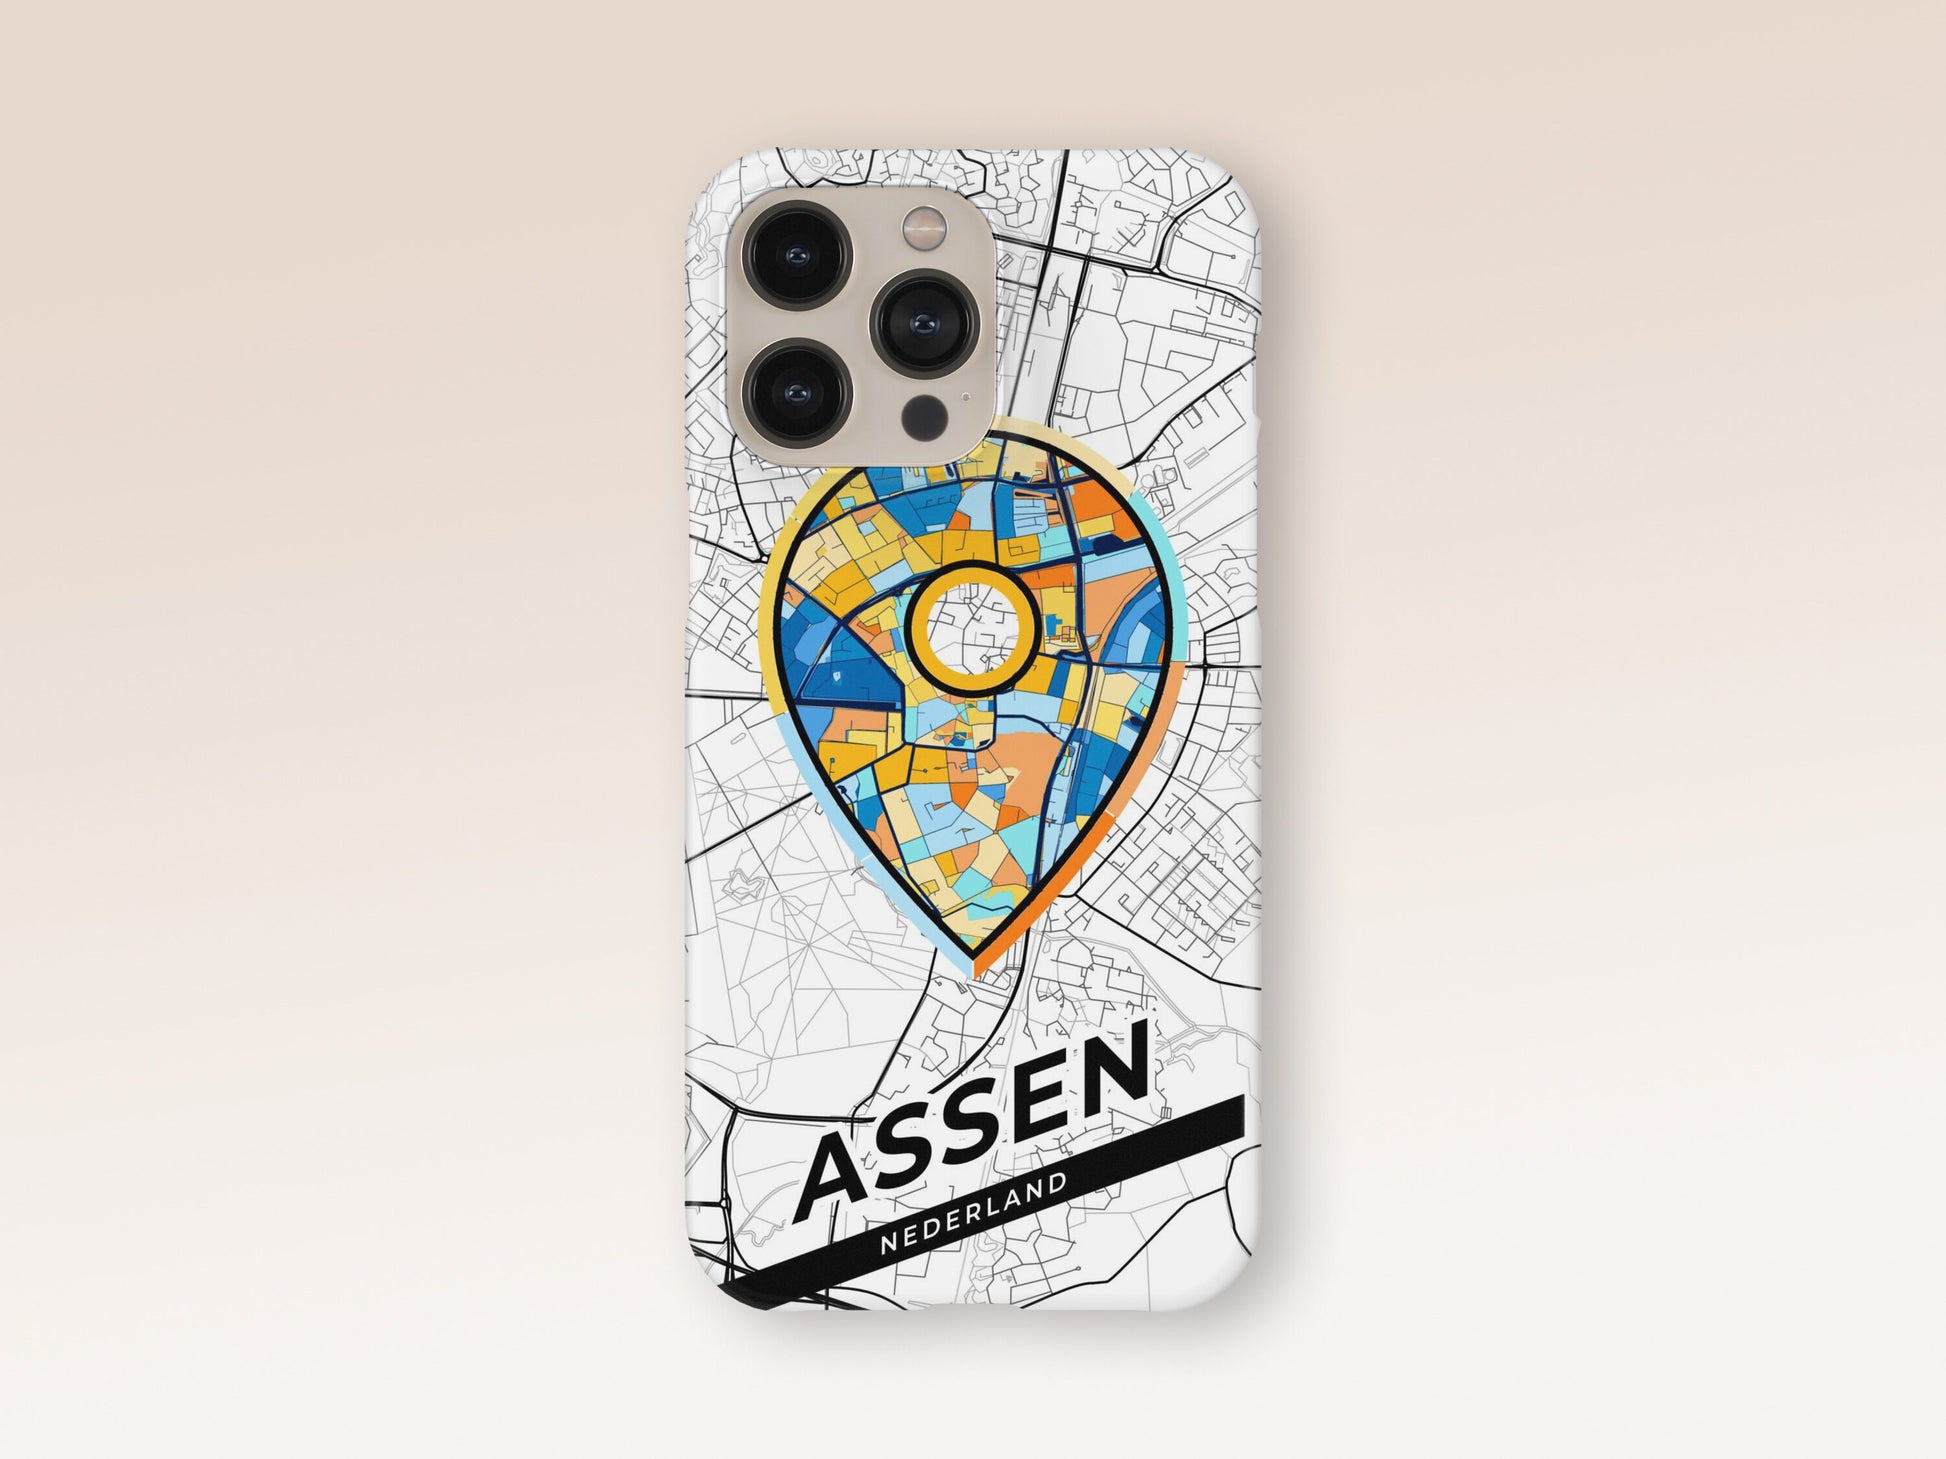 Assen Netherlands slim phone case with colorful icon. Birthday, wedding or housewarming gift. Couple match cases. 1